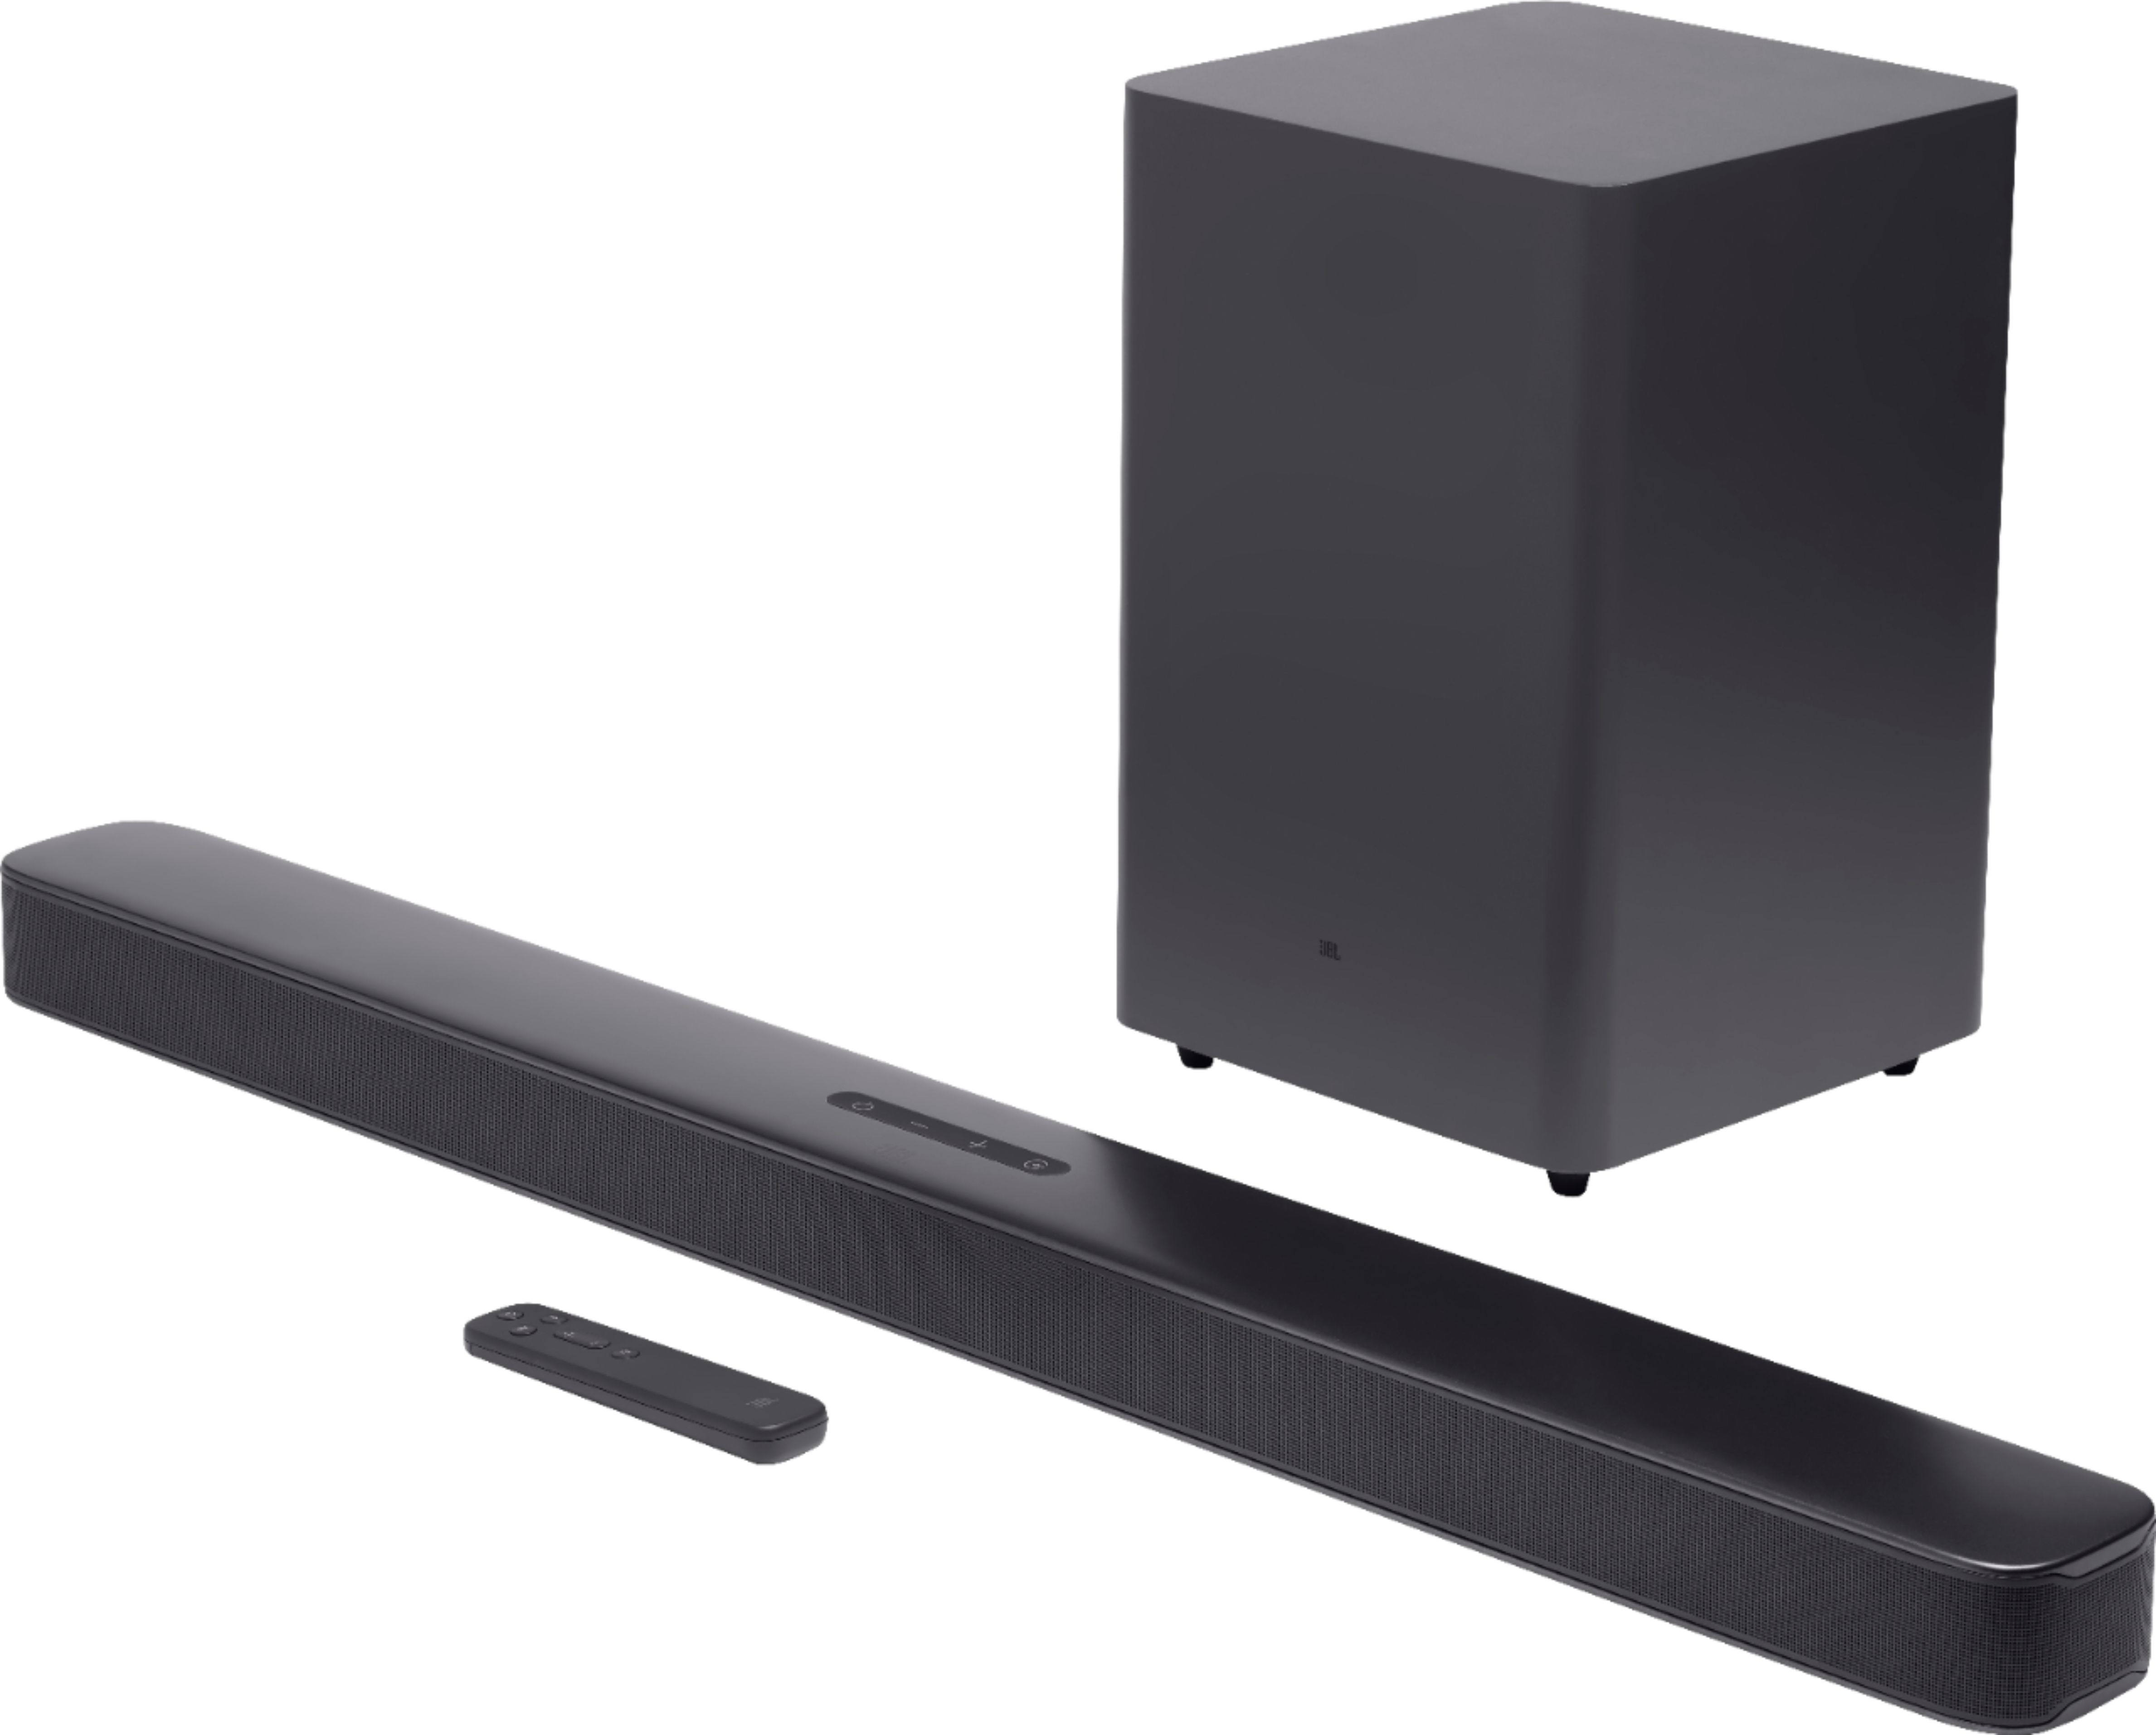 JBL 2.1-Channel Soundbar with Wireless Subwoofer and Dolby Digital